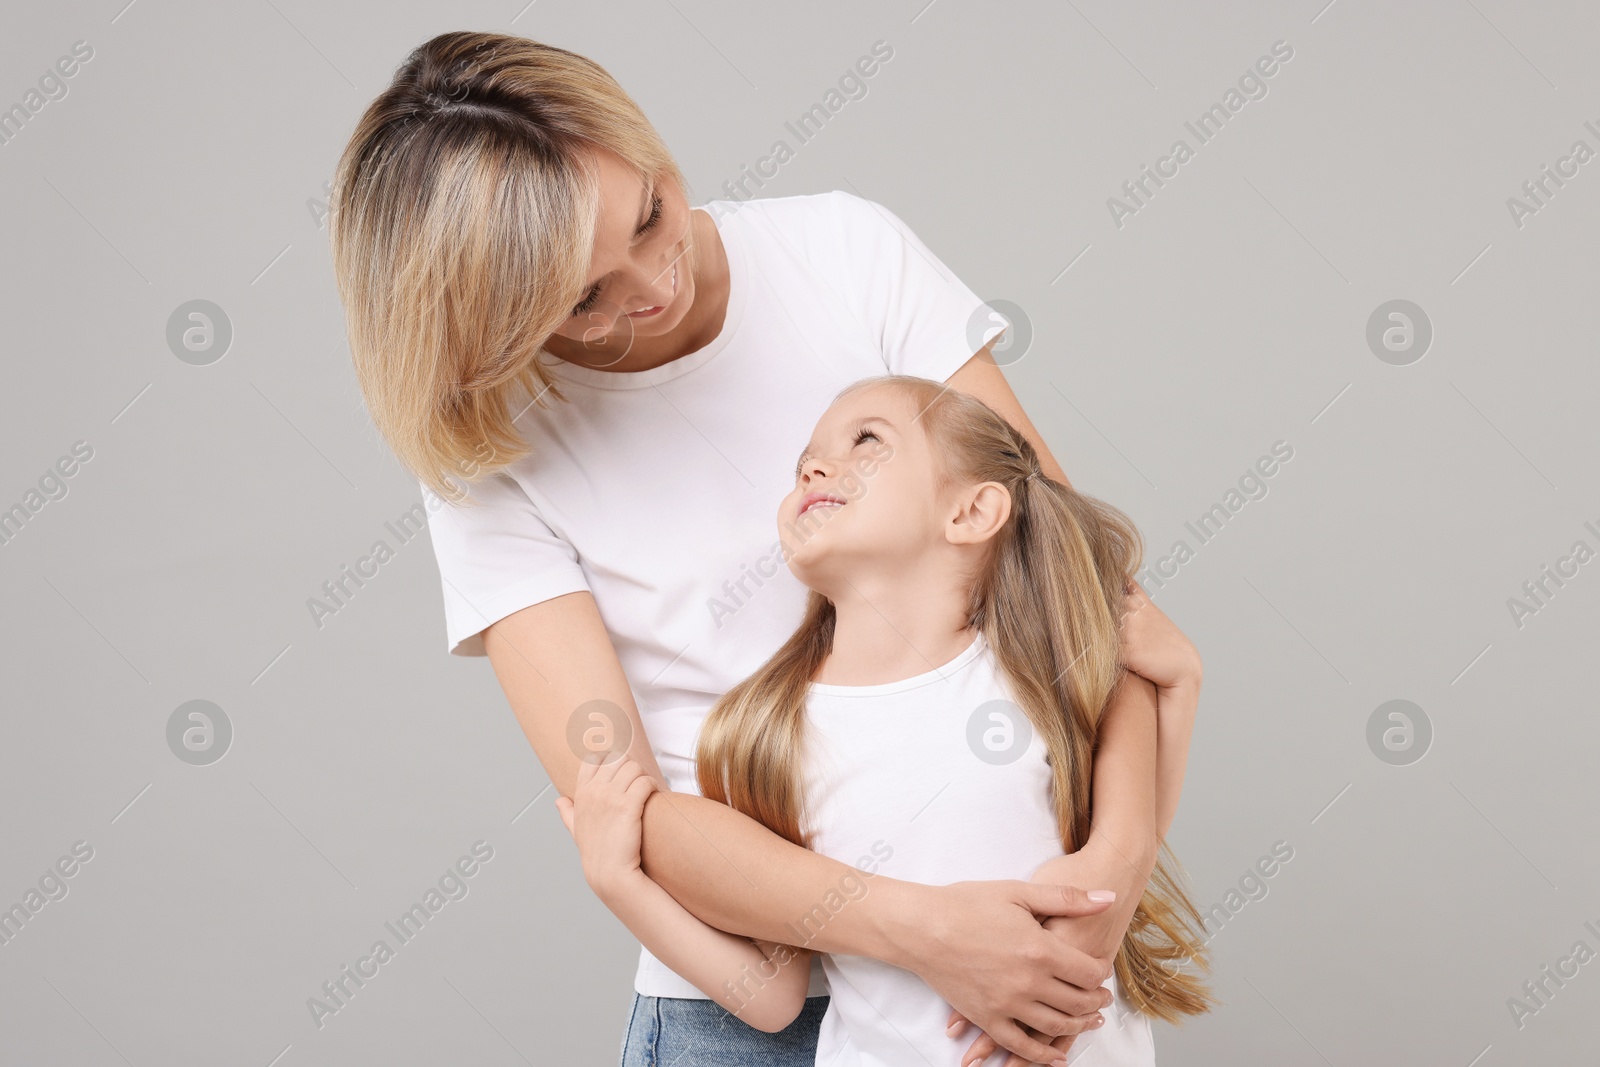 Photo of Family portrait of happy mother and daughter on grey background